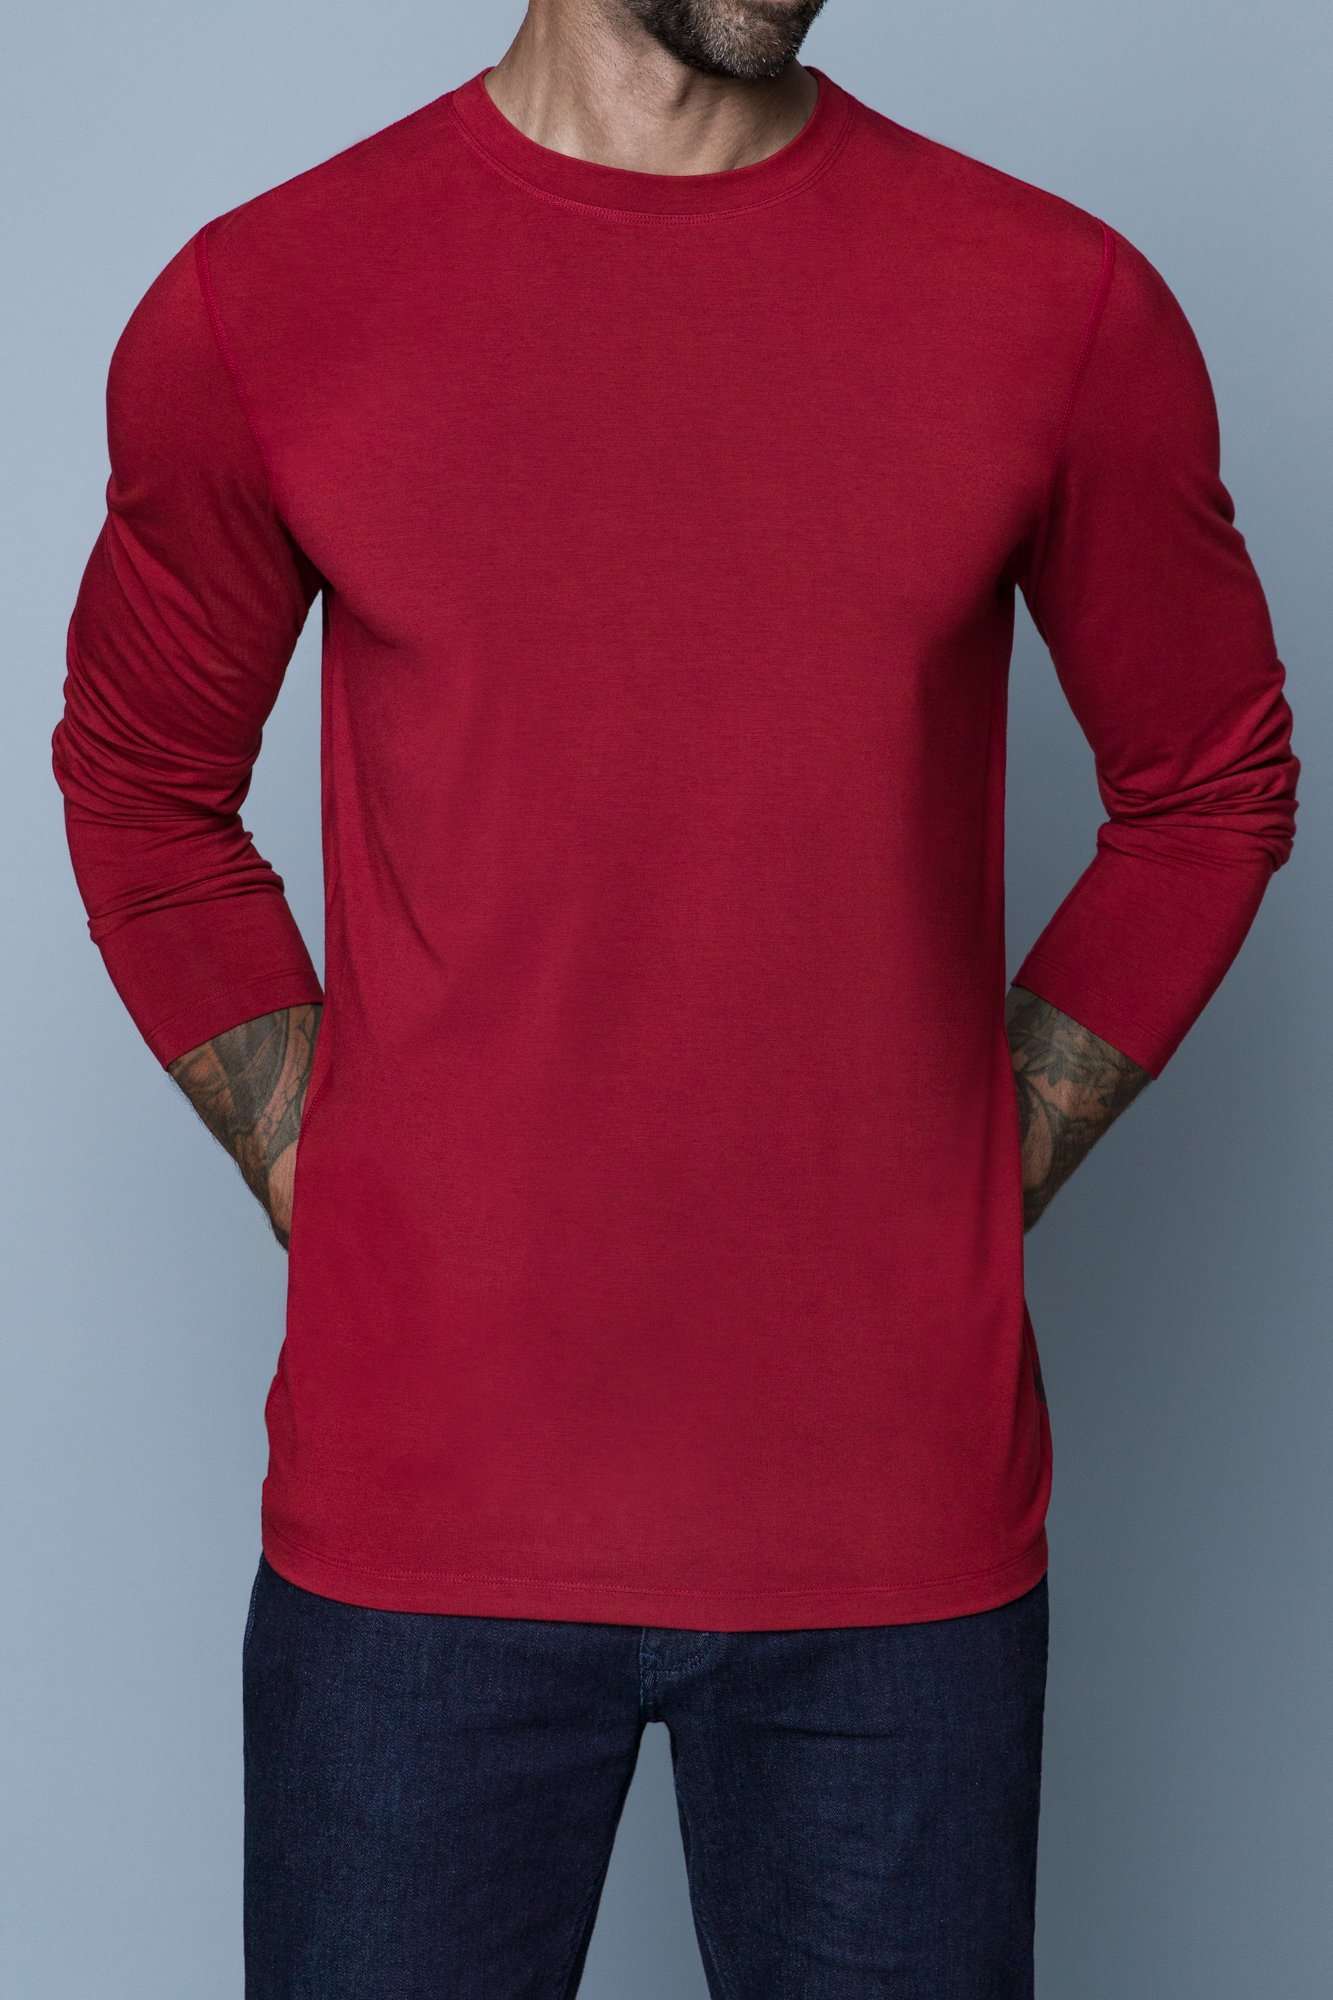 The Navas Lab Mac long-sleeve shirt for tall guys in red. The perfect tall slim shirt for tall and slim guys looking for style and comfort.